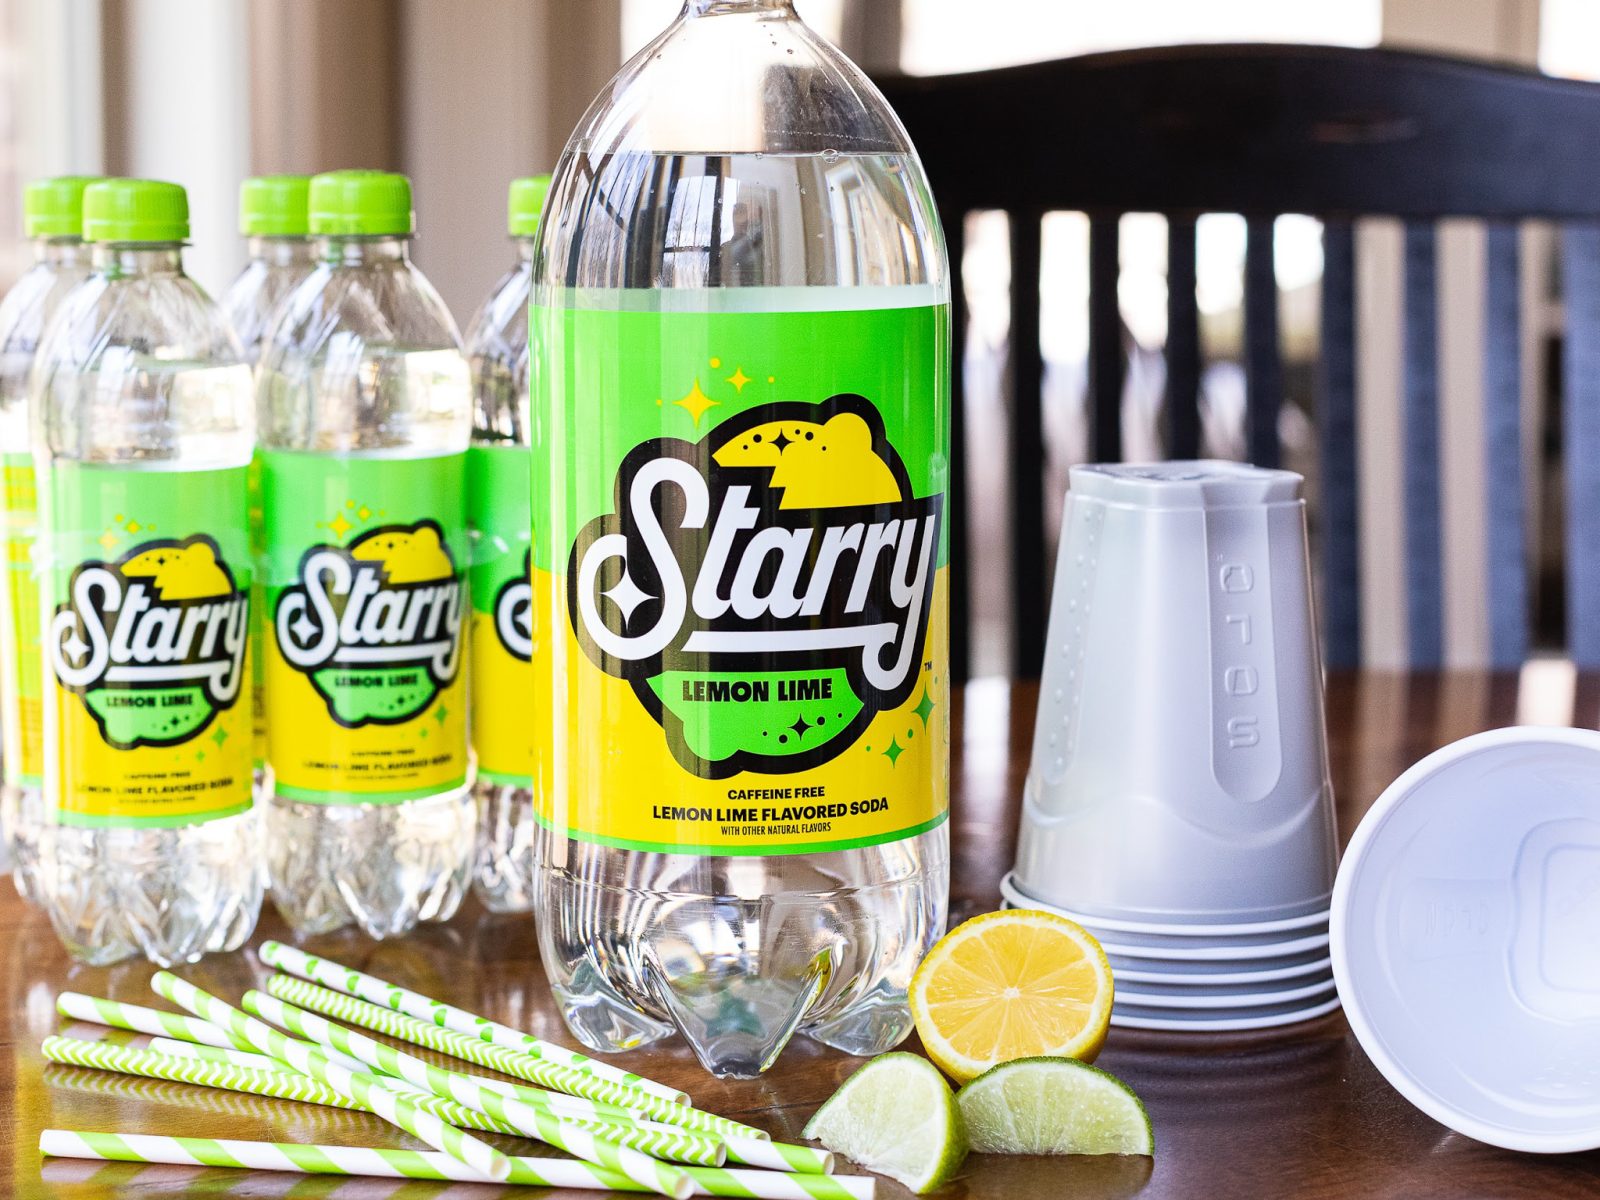 Get Starry 2-Liters For As Low As 80¢ Each At Kroger